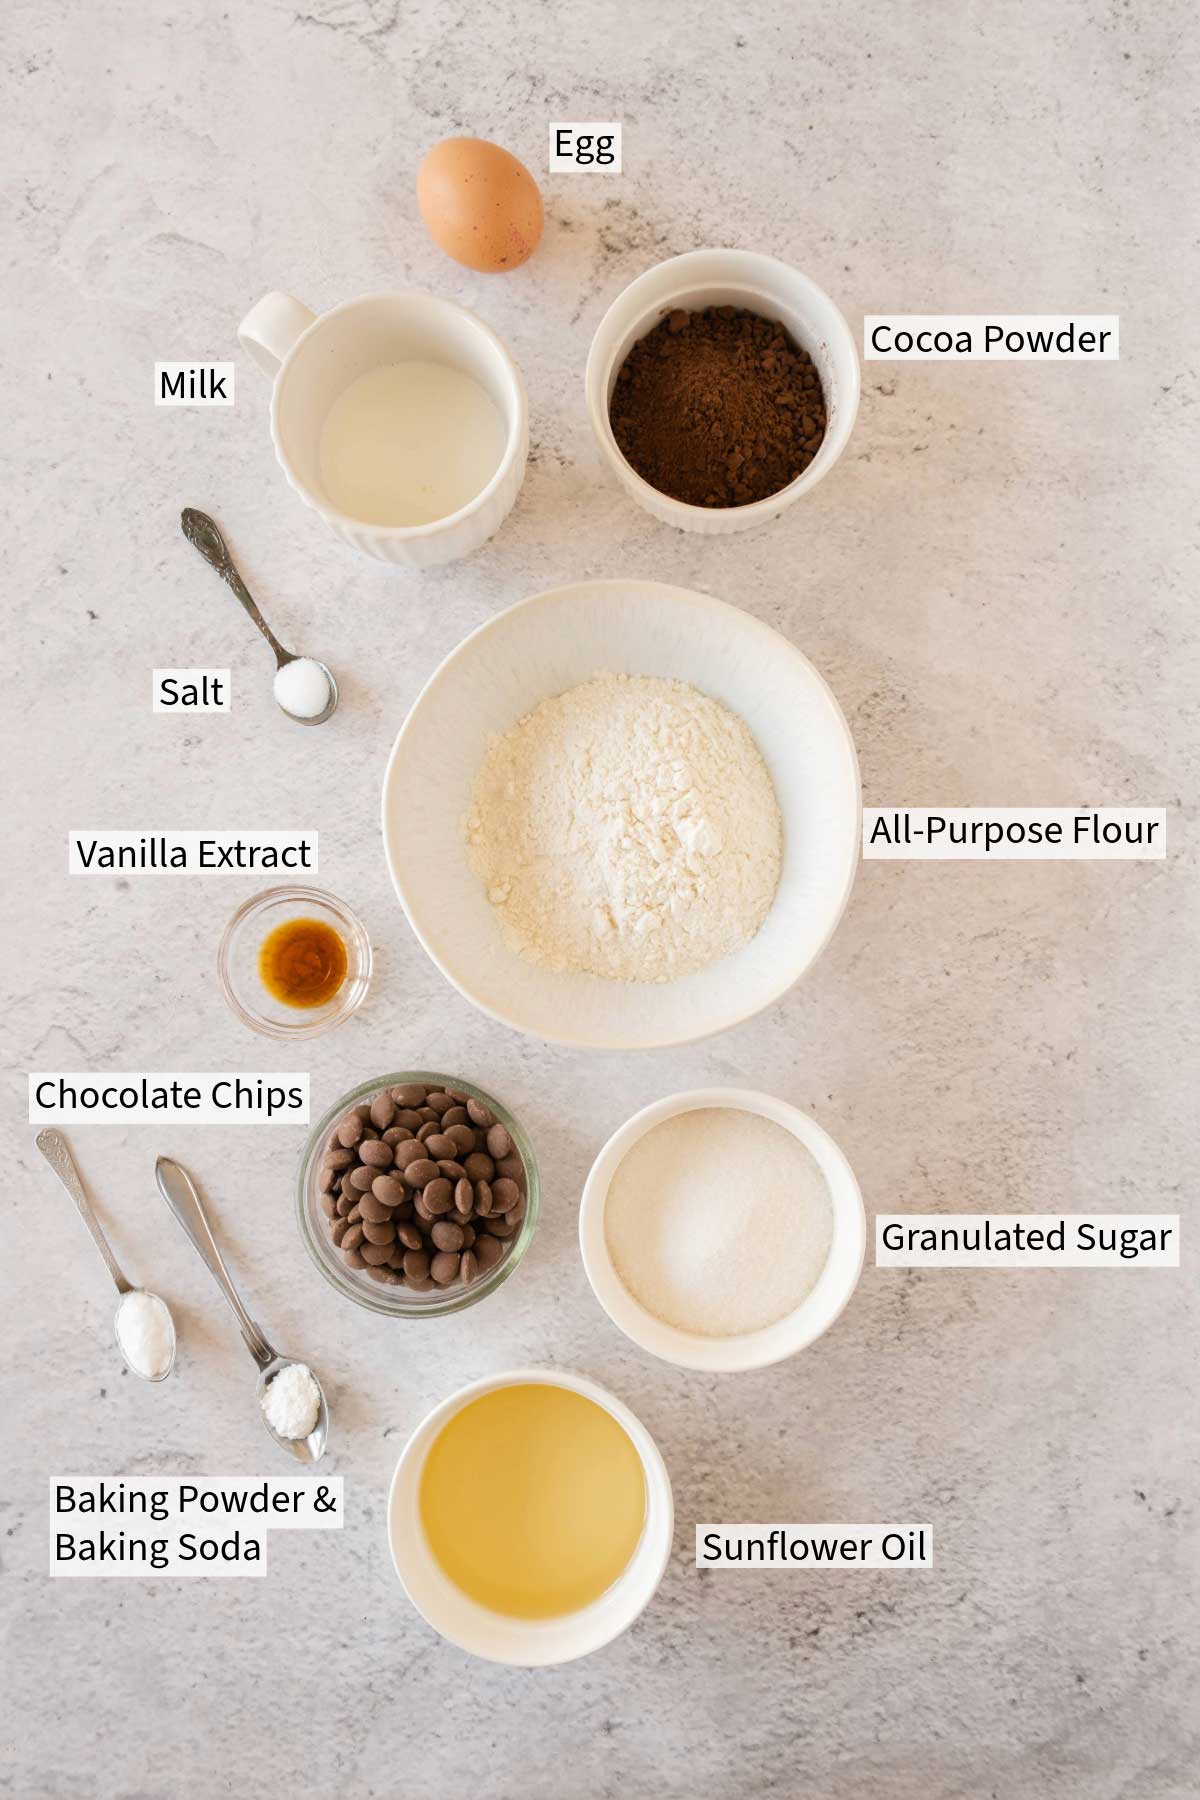 Overhead view of various baking ingredients for chocolate cupcakes labeled on a kitchen counter.